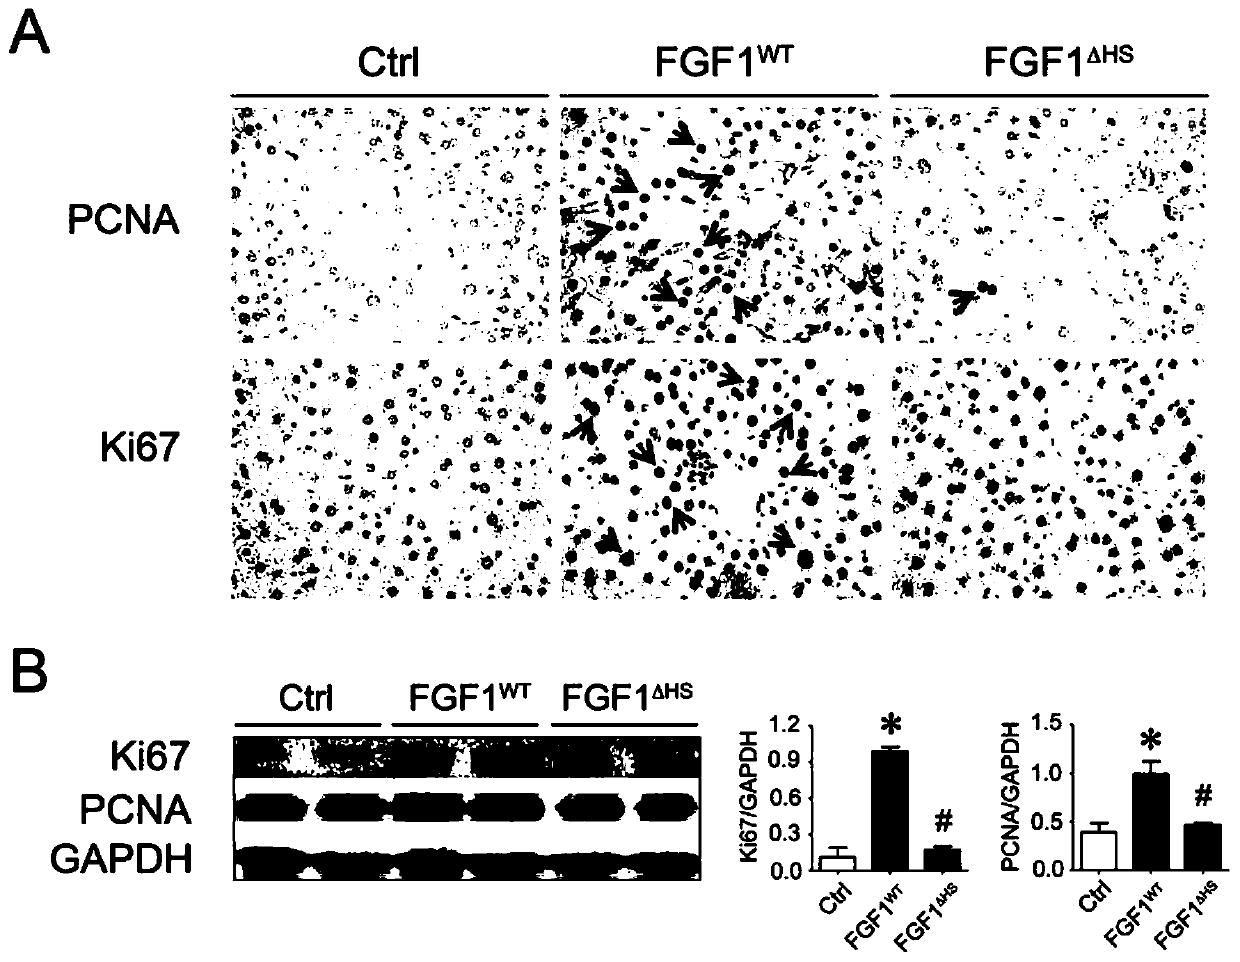 fgf1 mutant and its medical application